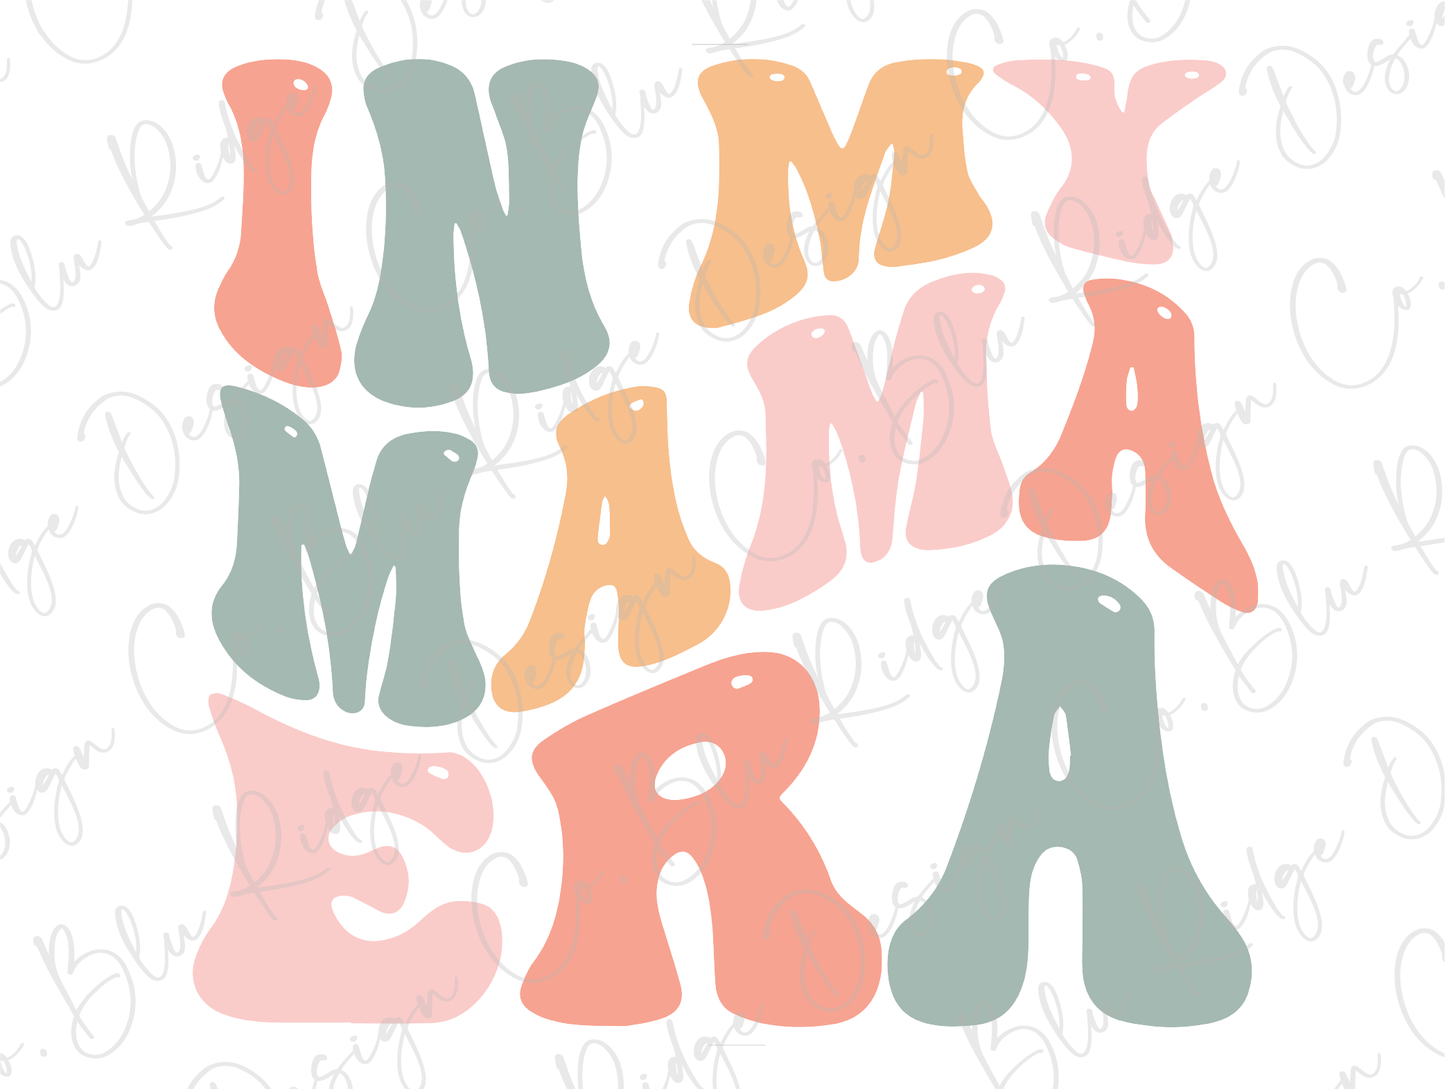 In My Mama Era Colorful Stacked Retro Groovy Direct To Film (DTF) Transfer